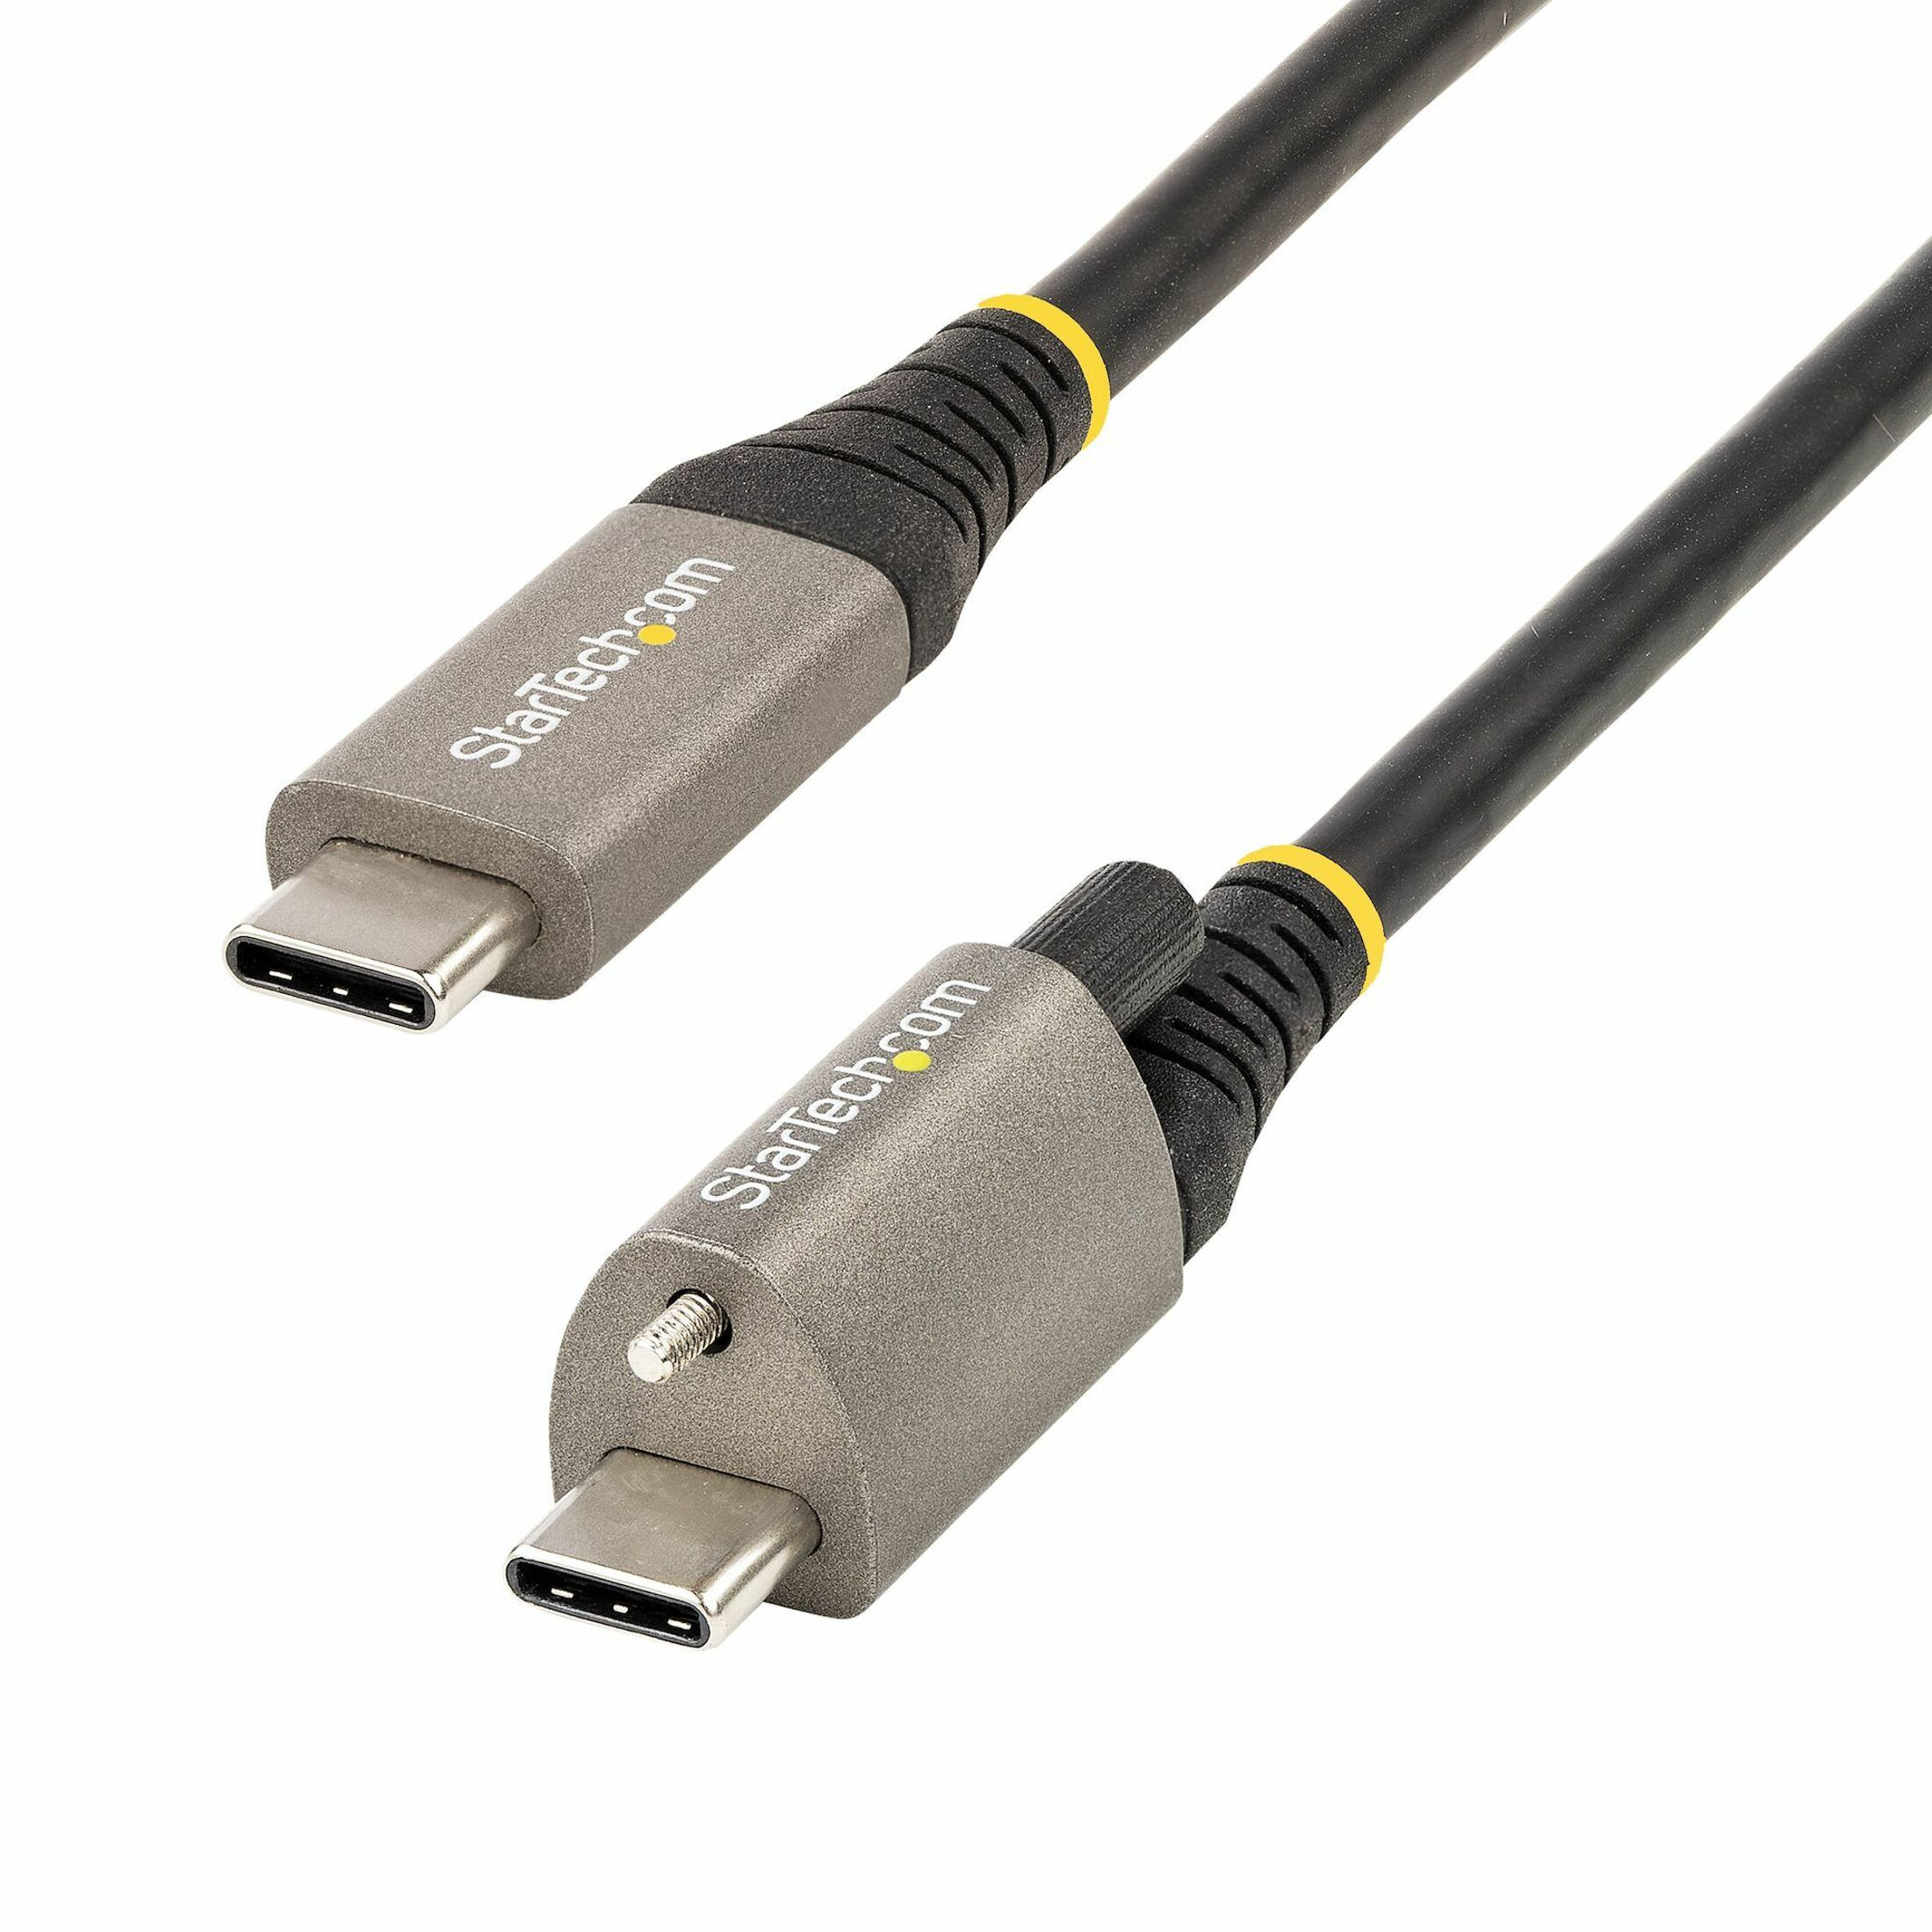 kandidat forstene forhåndsvisning Startech .com 3ft 1m Top Single Screw Locking USB C Cable 10Gbps, USB 3.1/3.2  Gen 2 Type-C Cable, 5A/100W PD, DP Alt Mode, USB-C to C Cord...  USB31CCTLKV1M - Corporate Armor